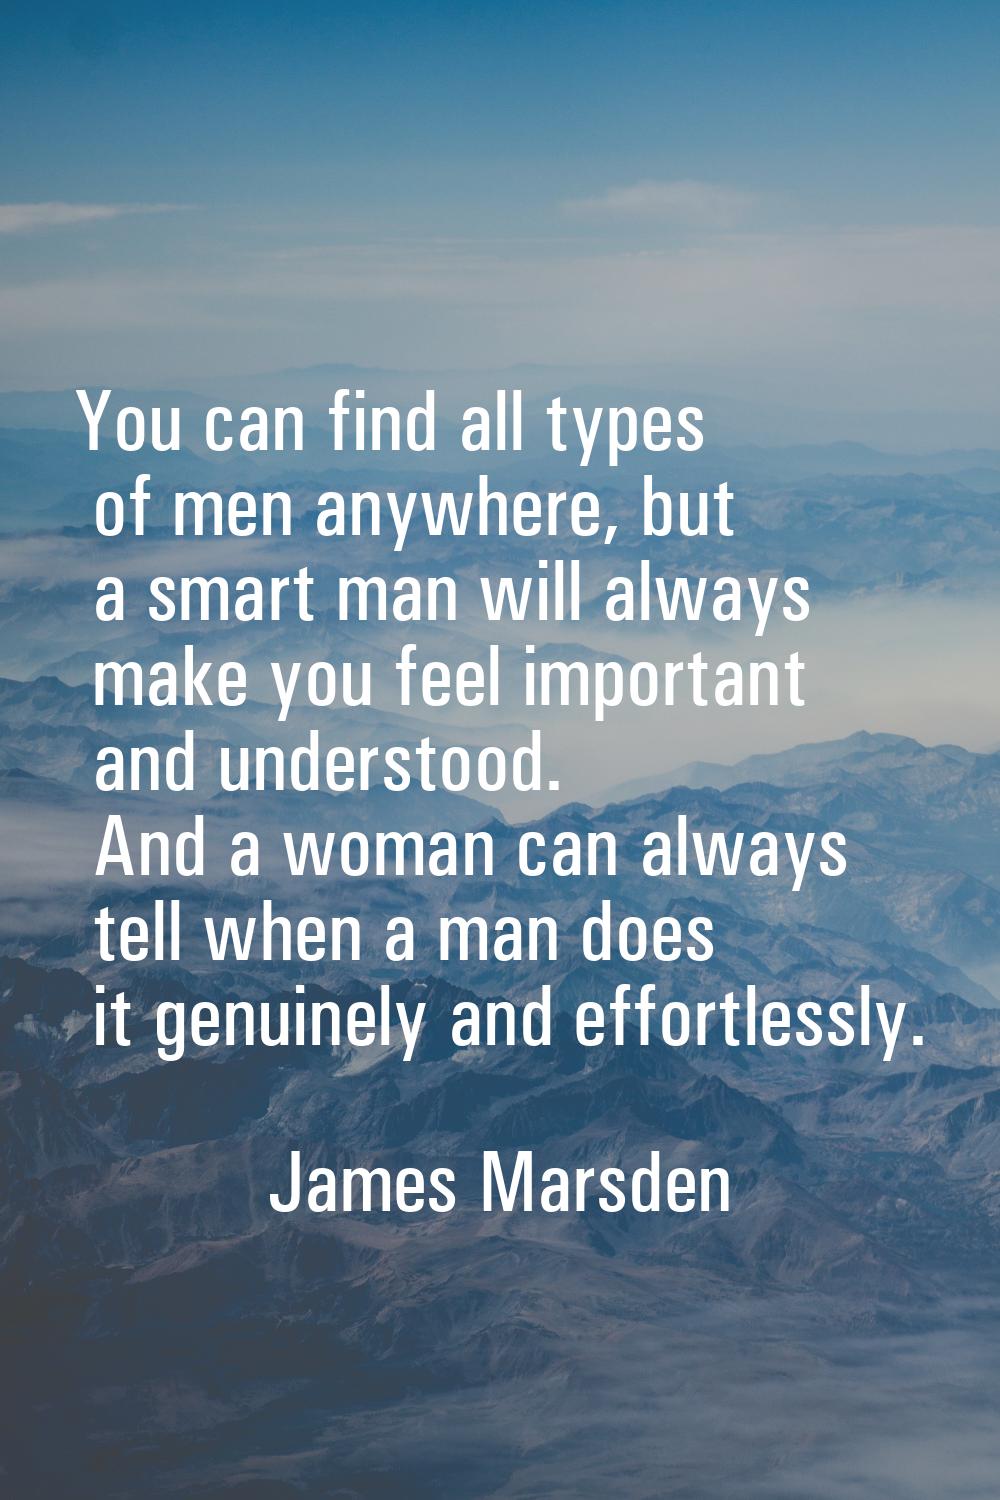 You can find all types of men anywhere, but a smart man will always make you feel important and und